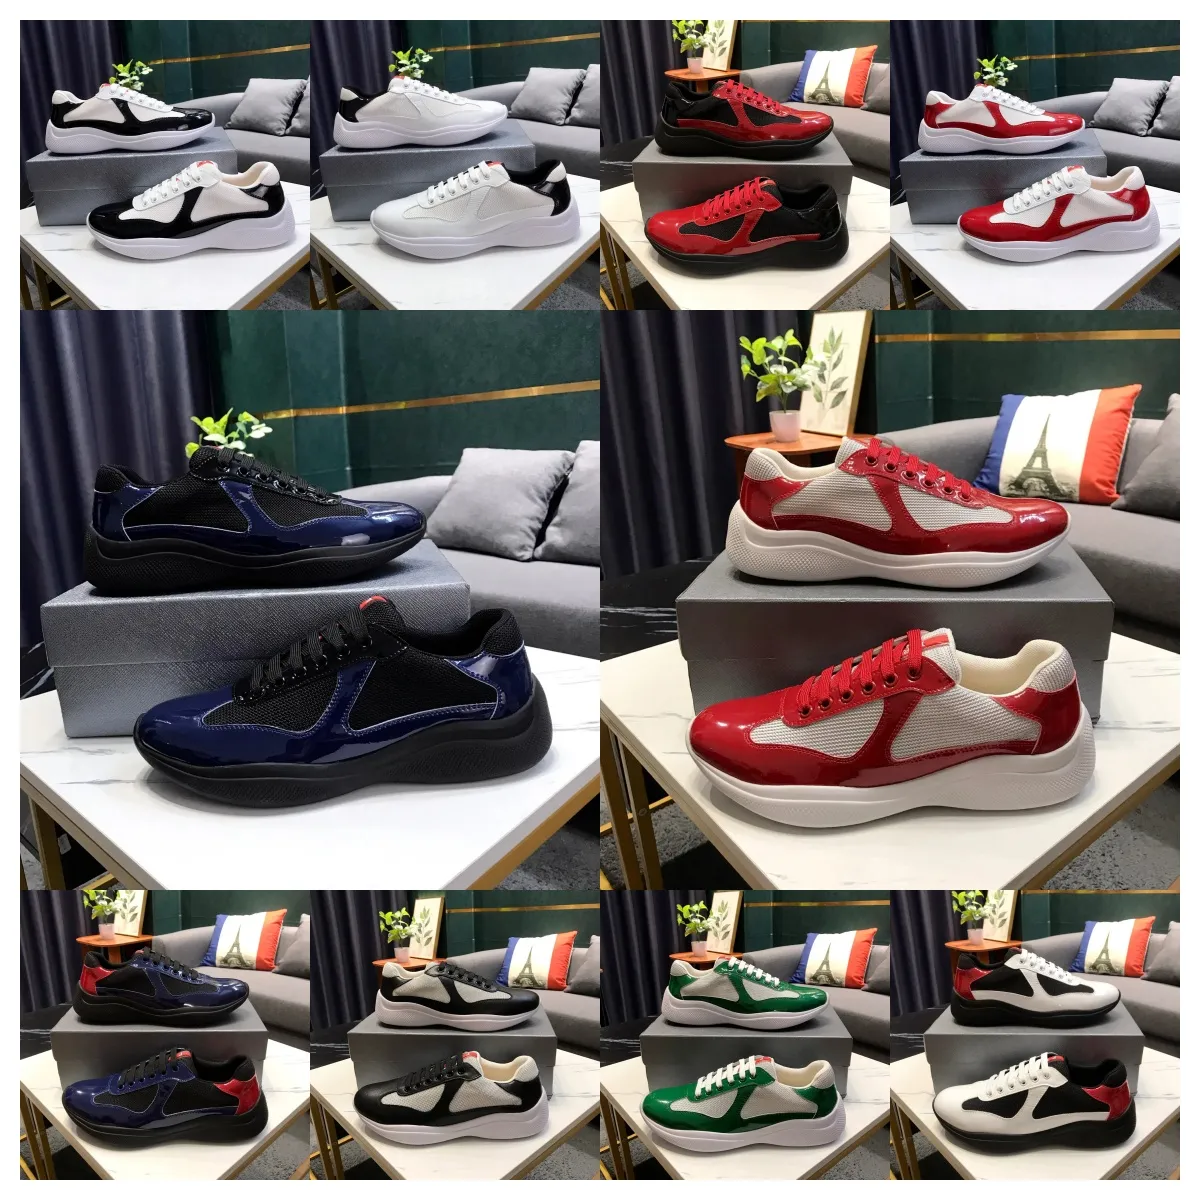 New America's Cup Designer Shoes For Men Brands Sneakers Patent Leather Black White Flats Plat-Forme Chaussure Walking Casual Americas Cups Trainers